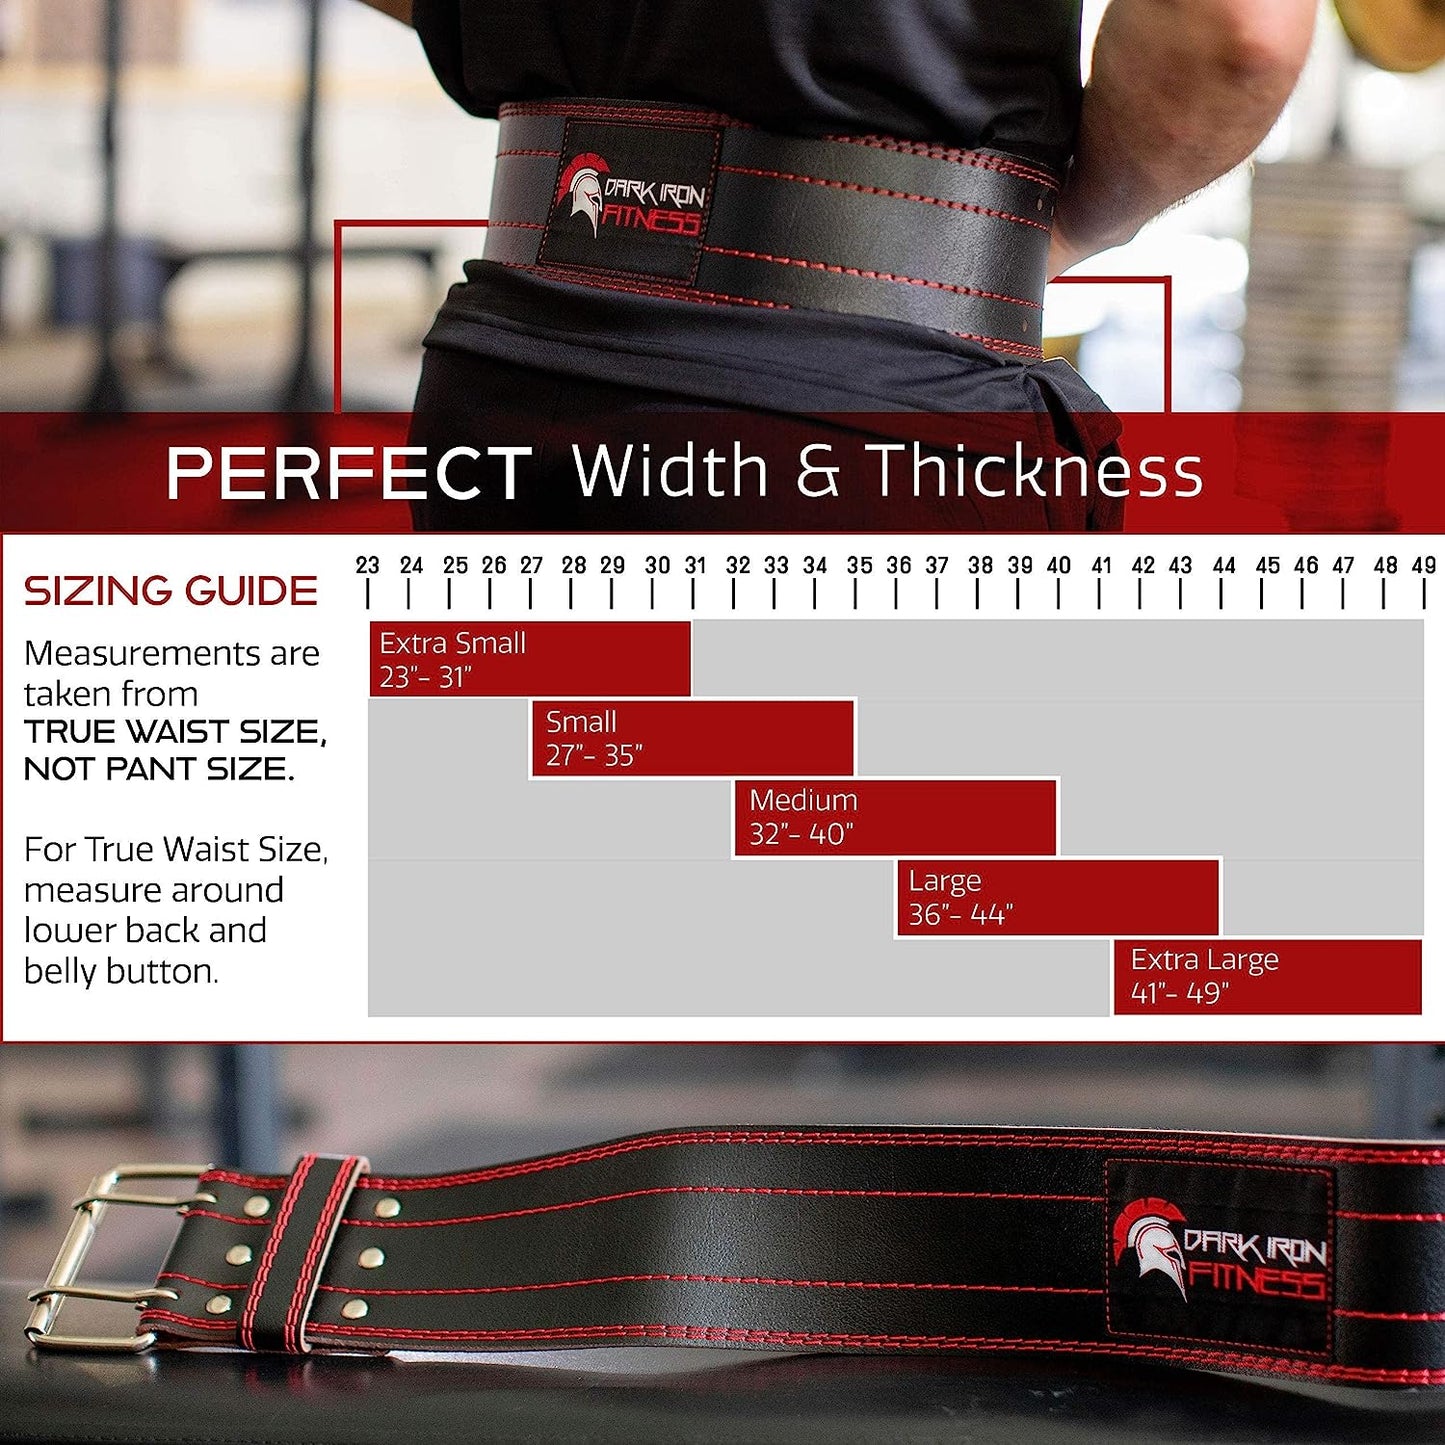 Weight Lifting Belt for Men & Women - 100% Leather Gym Belts for Weightlifting, Powerlifting, Strength Training, Squat or Deadlift Workout up to 600 Lbs